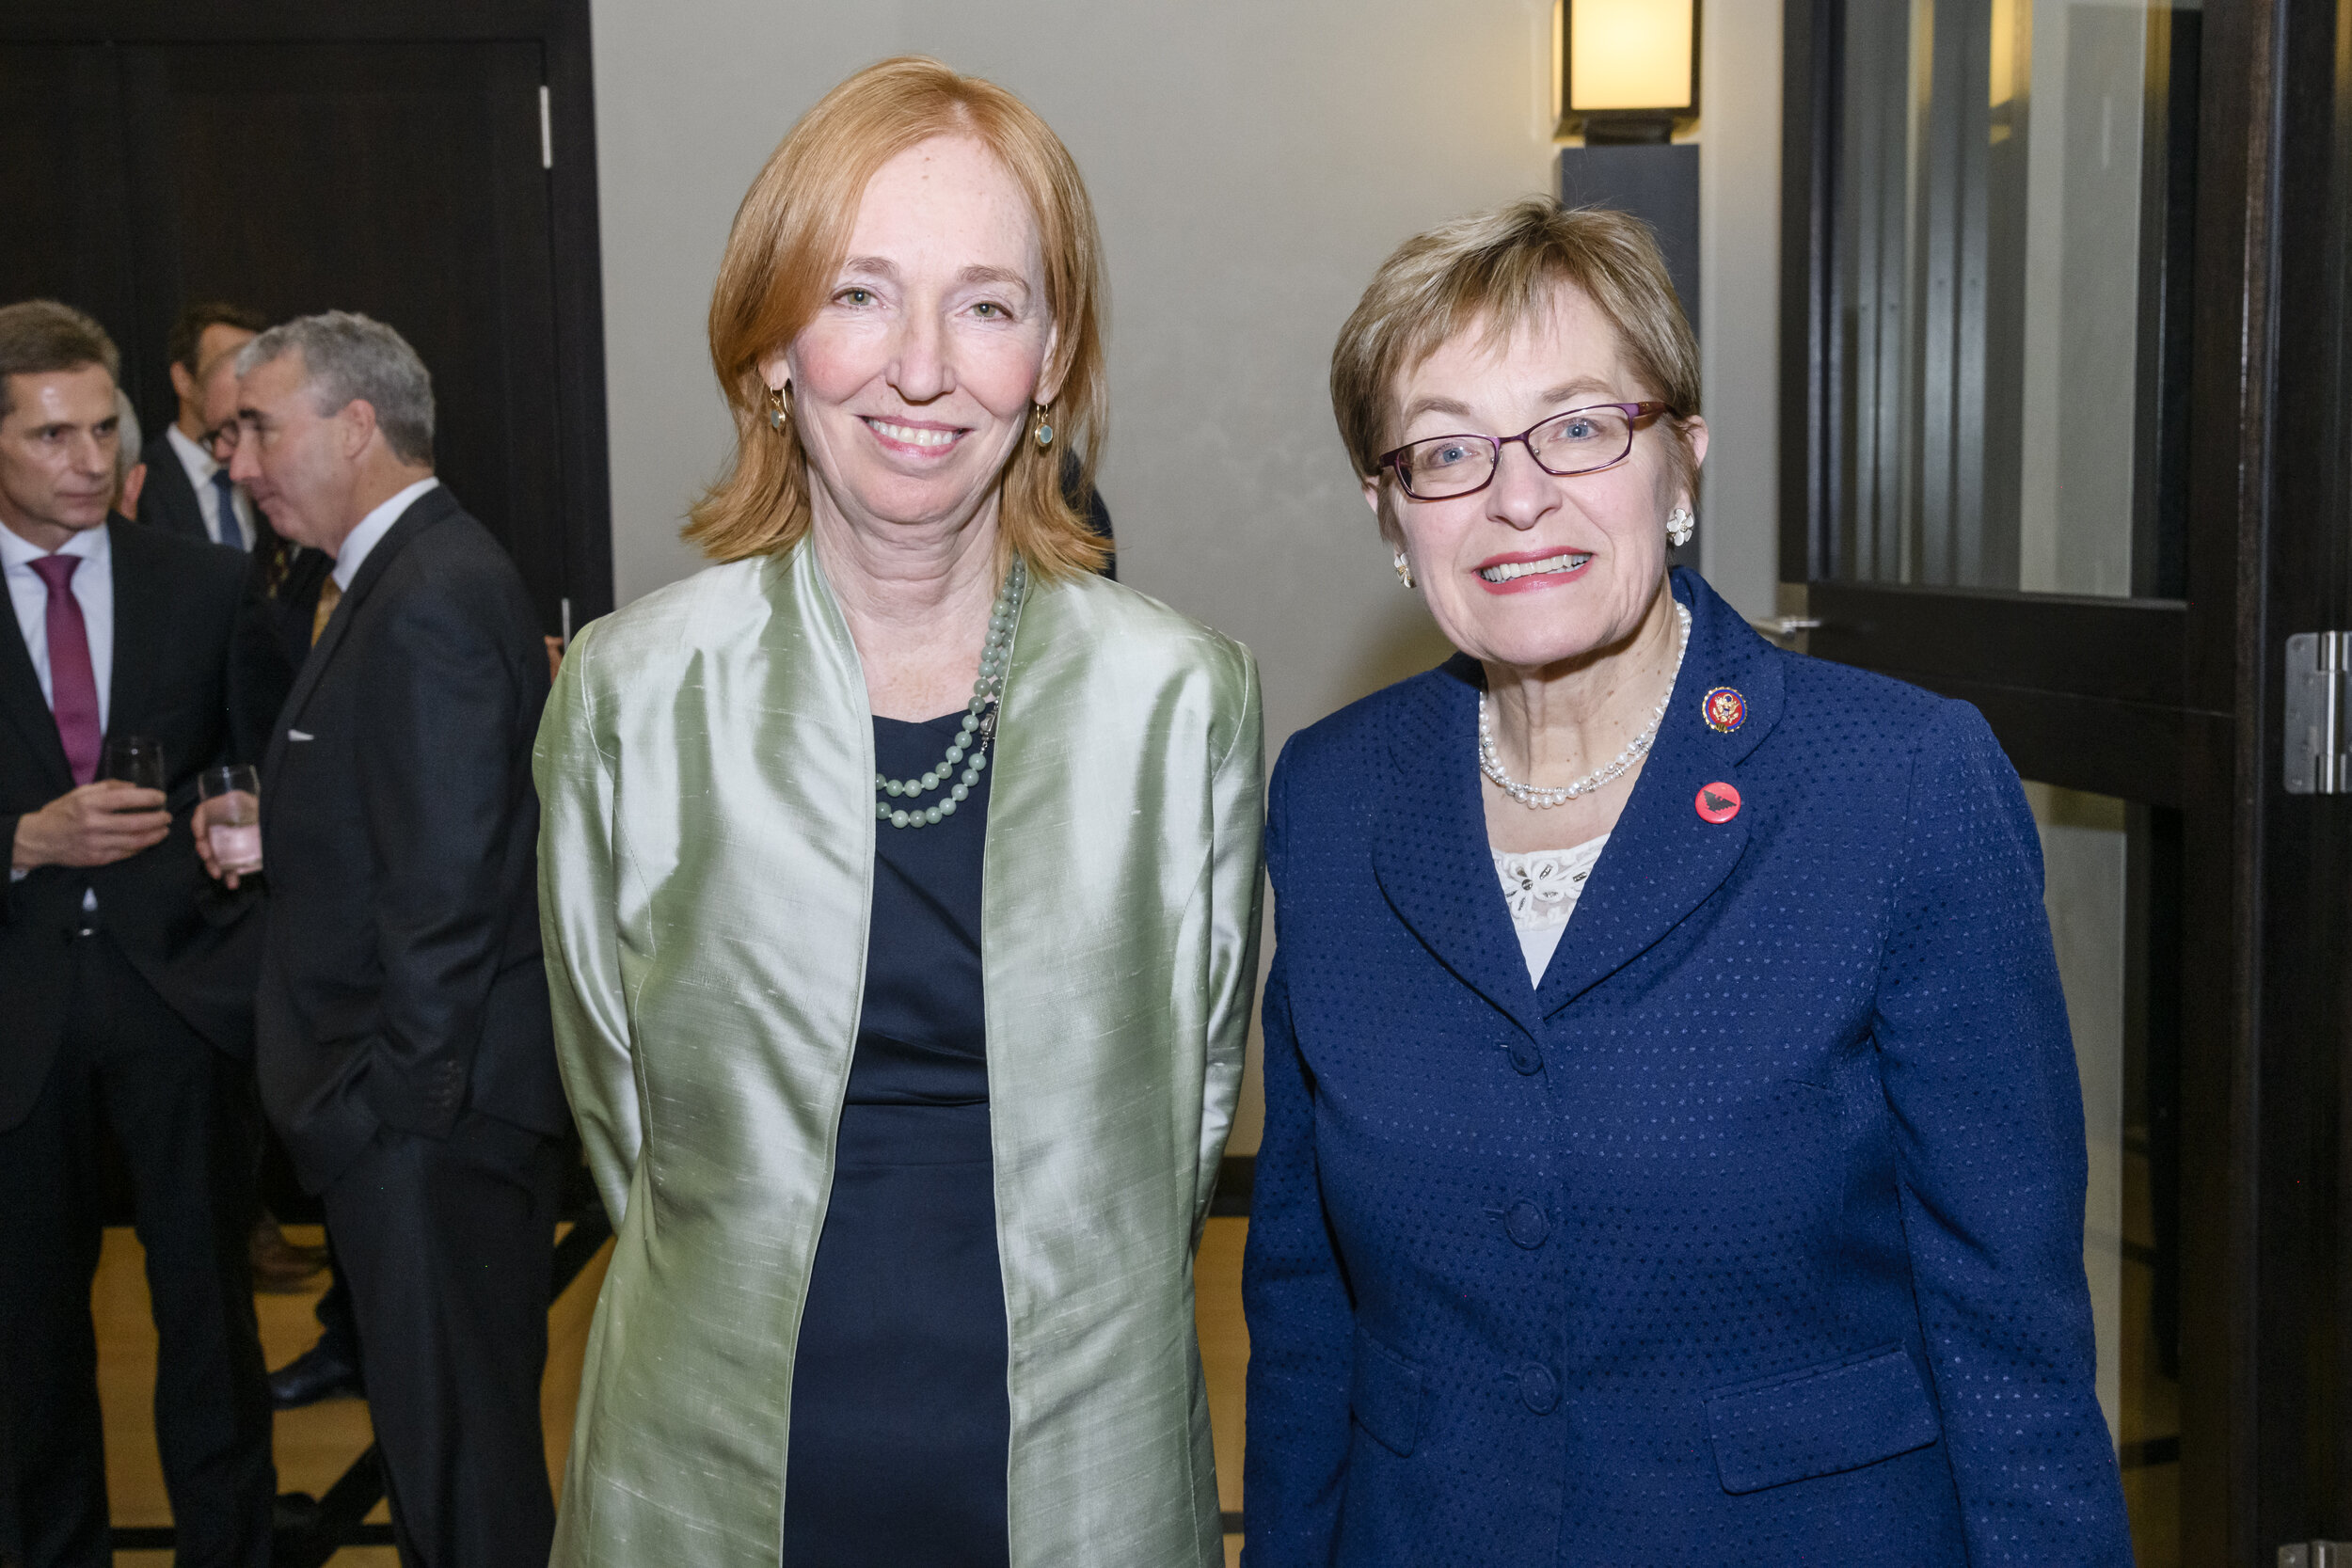  H.E. Emily Haber, Ambassador of Germany to the U.S. and Congresswoman Marcy Kaptur (OH-09). 